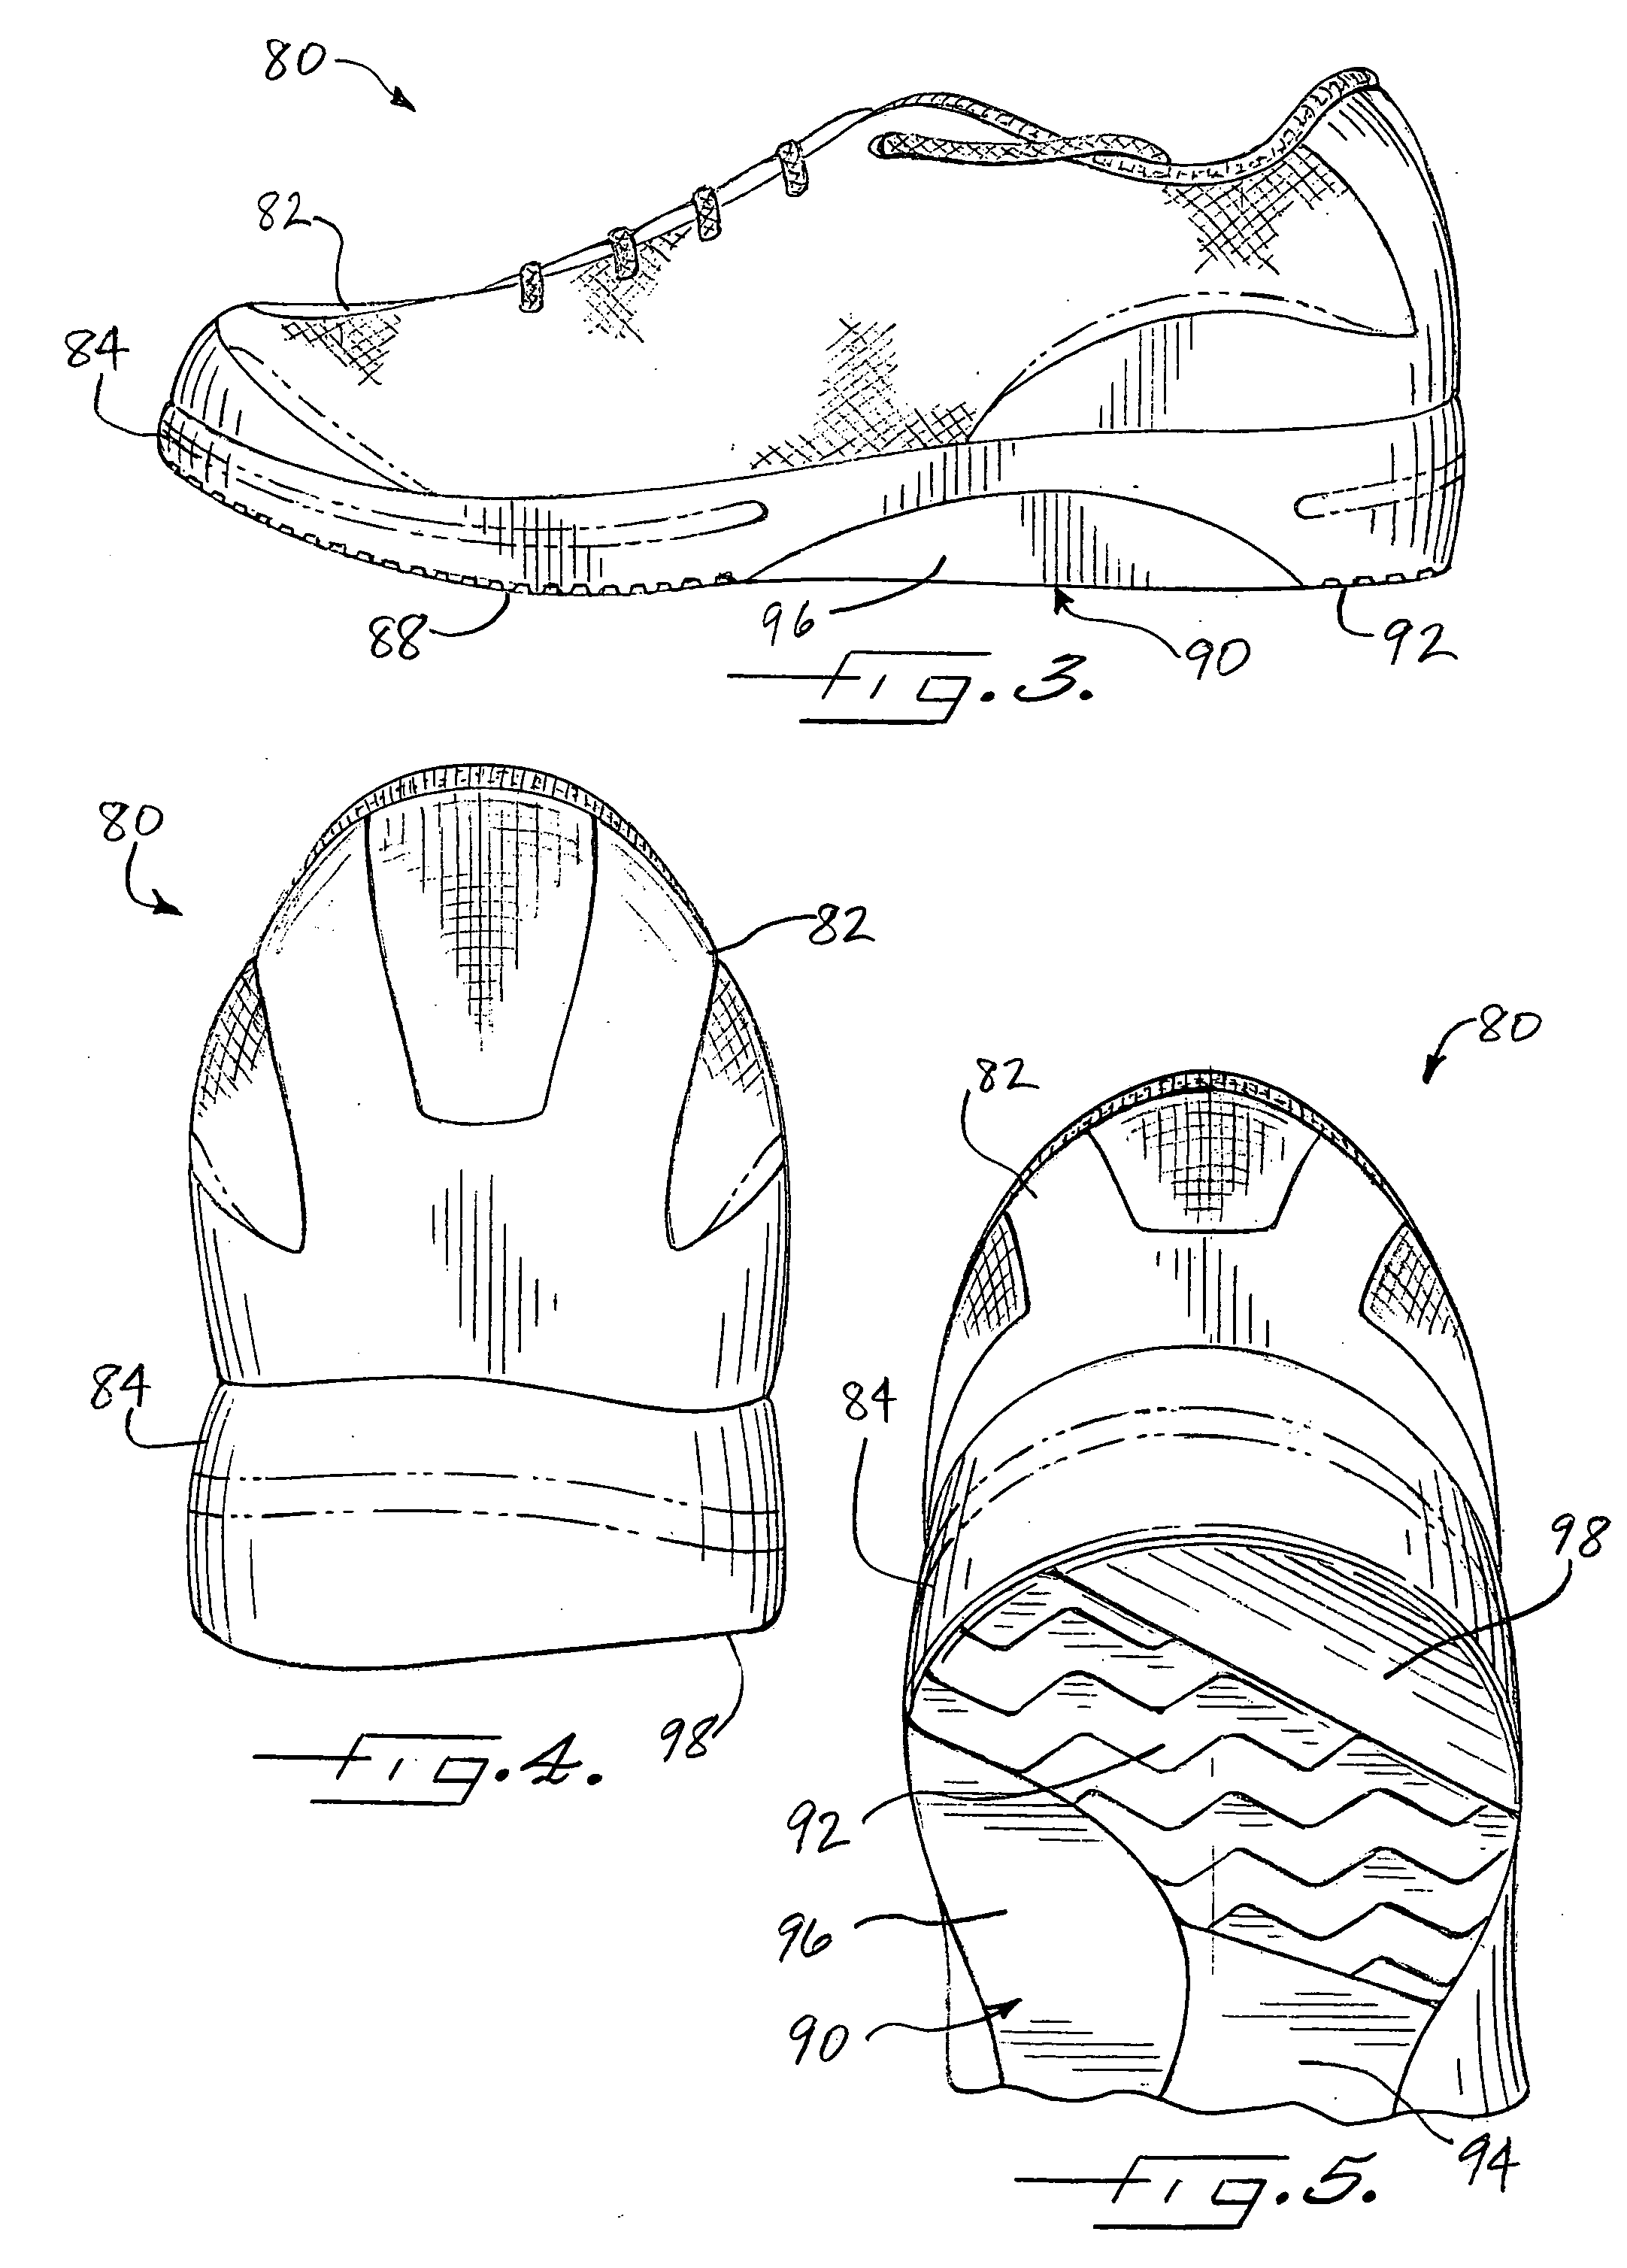 Insole, and footwear system incorporating same